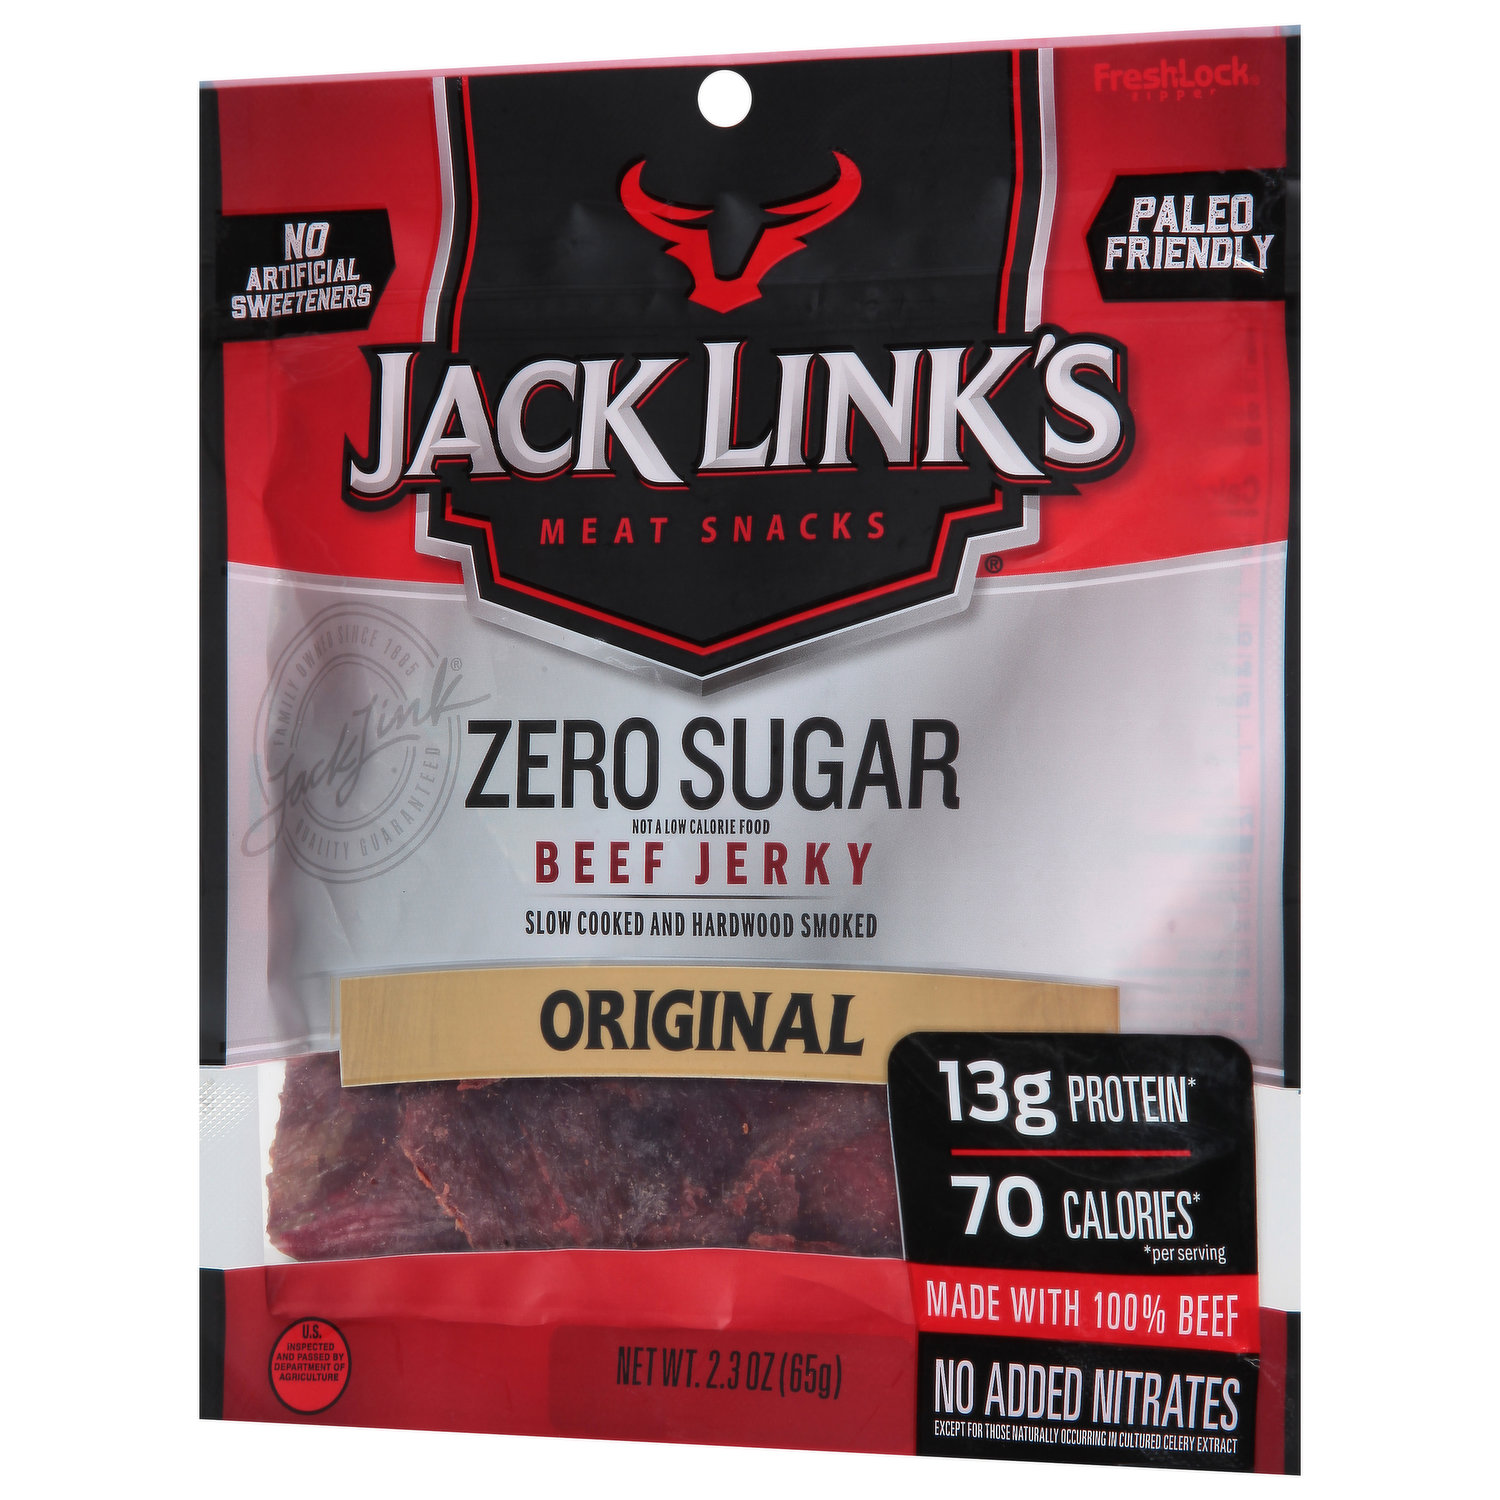 Jack Link's Beef Jerky, Original - Flavorful Meat Snack for Lunches, 13g  Protein and 100 Calories, Made with 100% Beef - No Added MSG** or